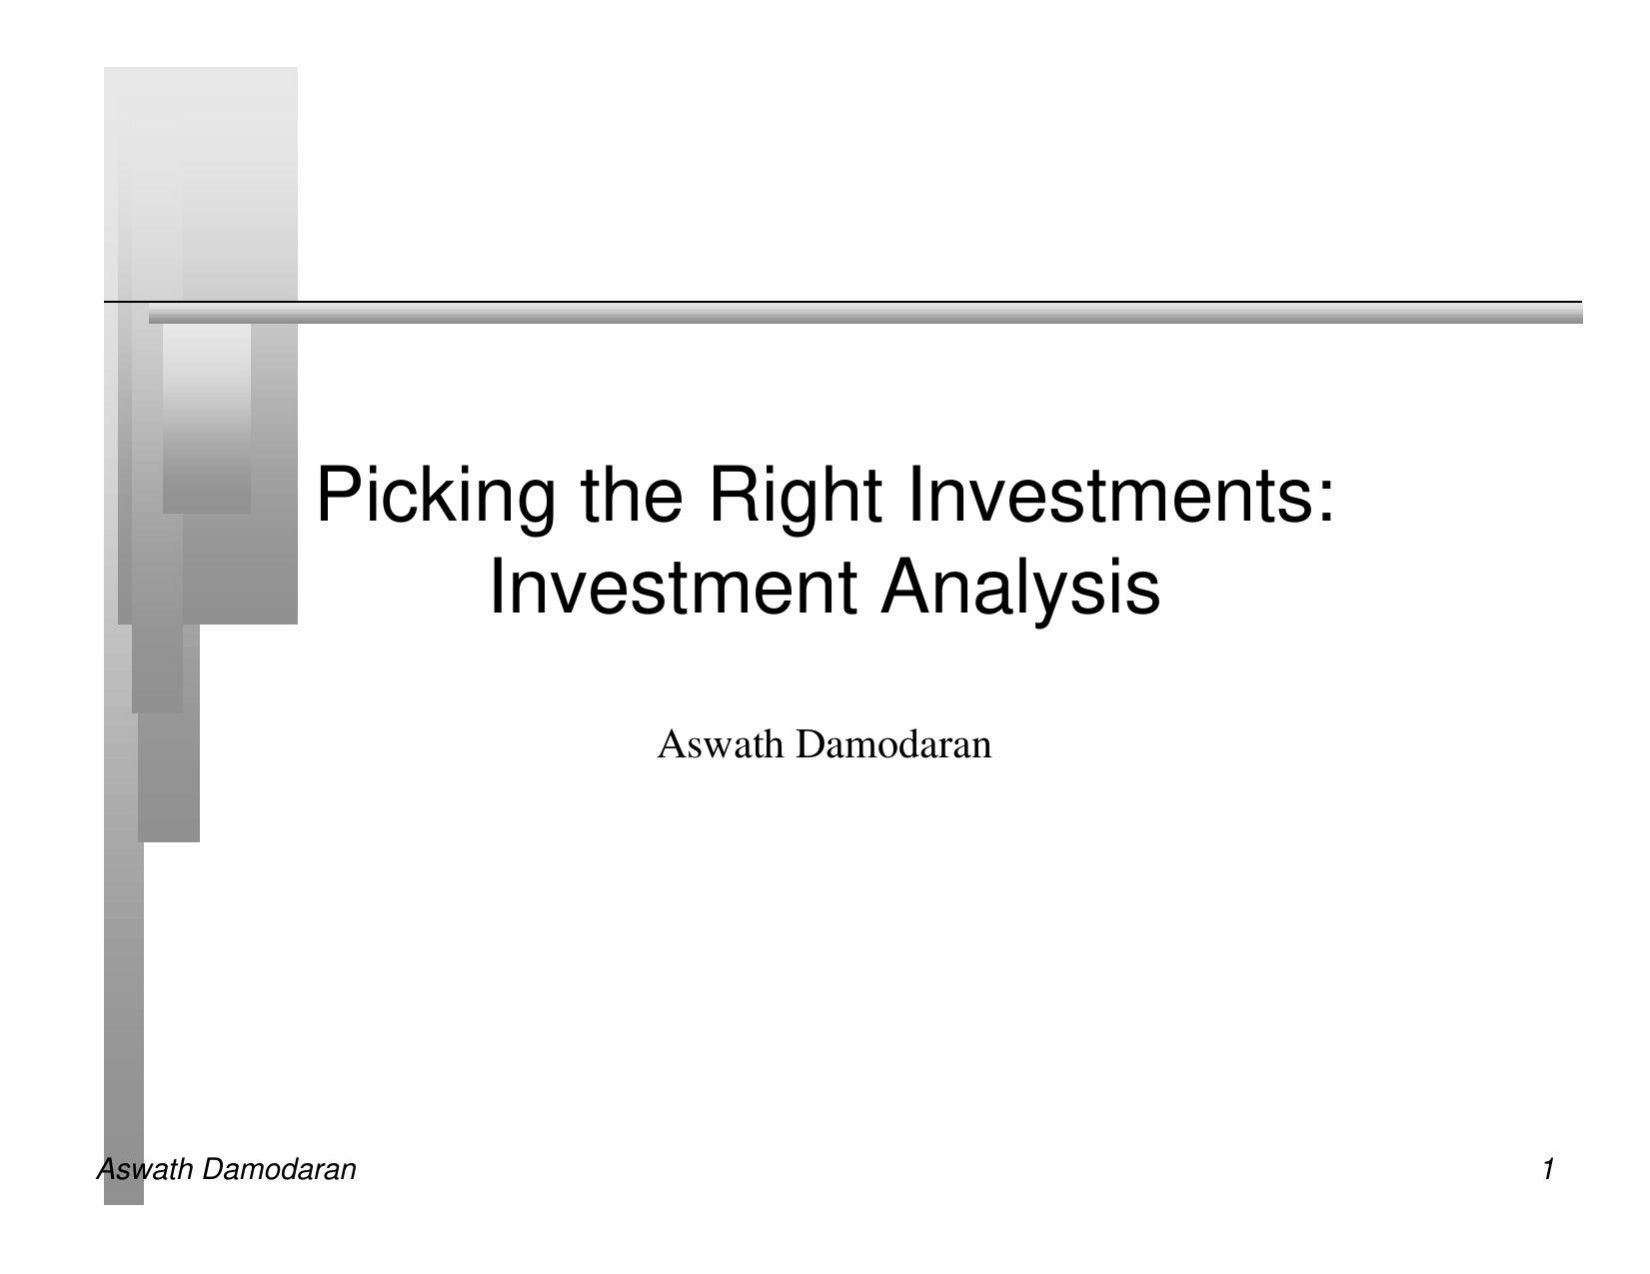 Picking the Right Investments 2009